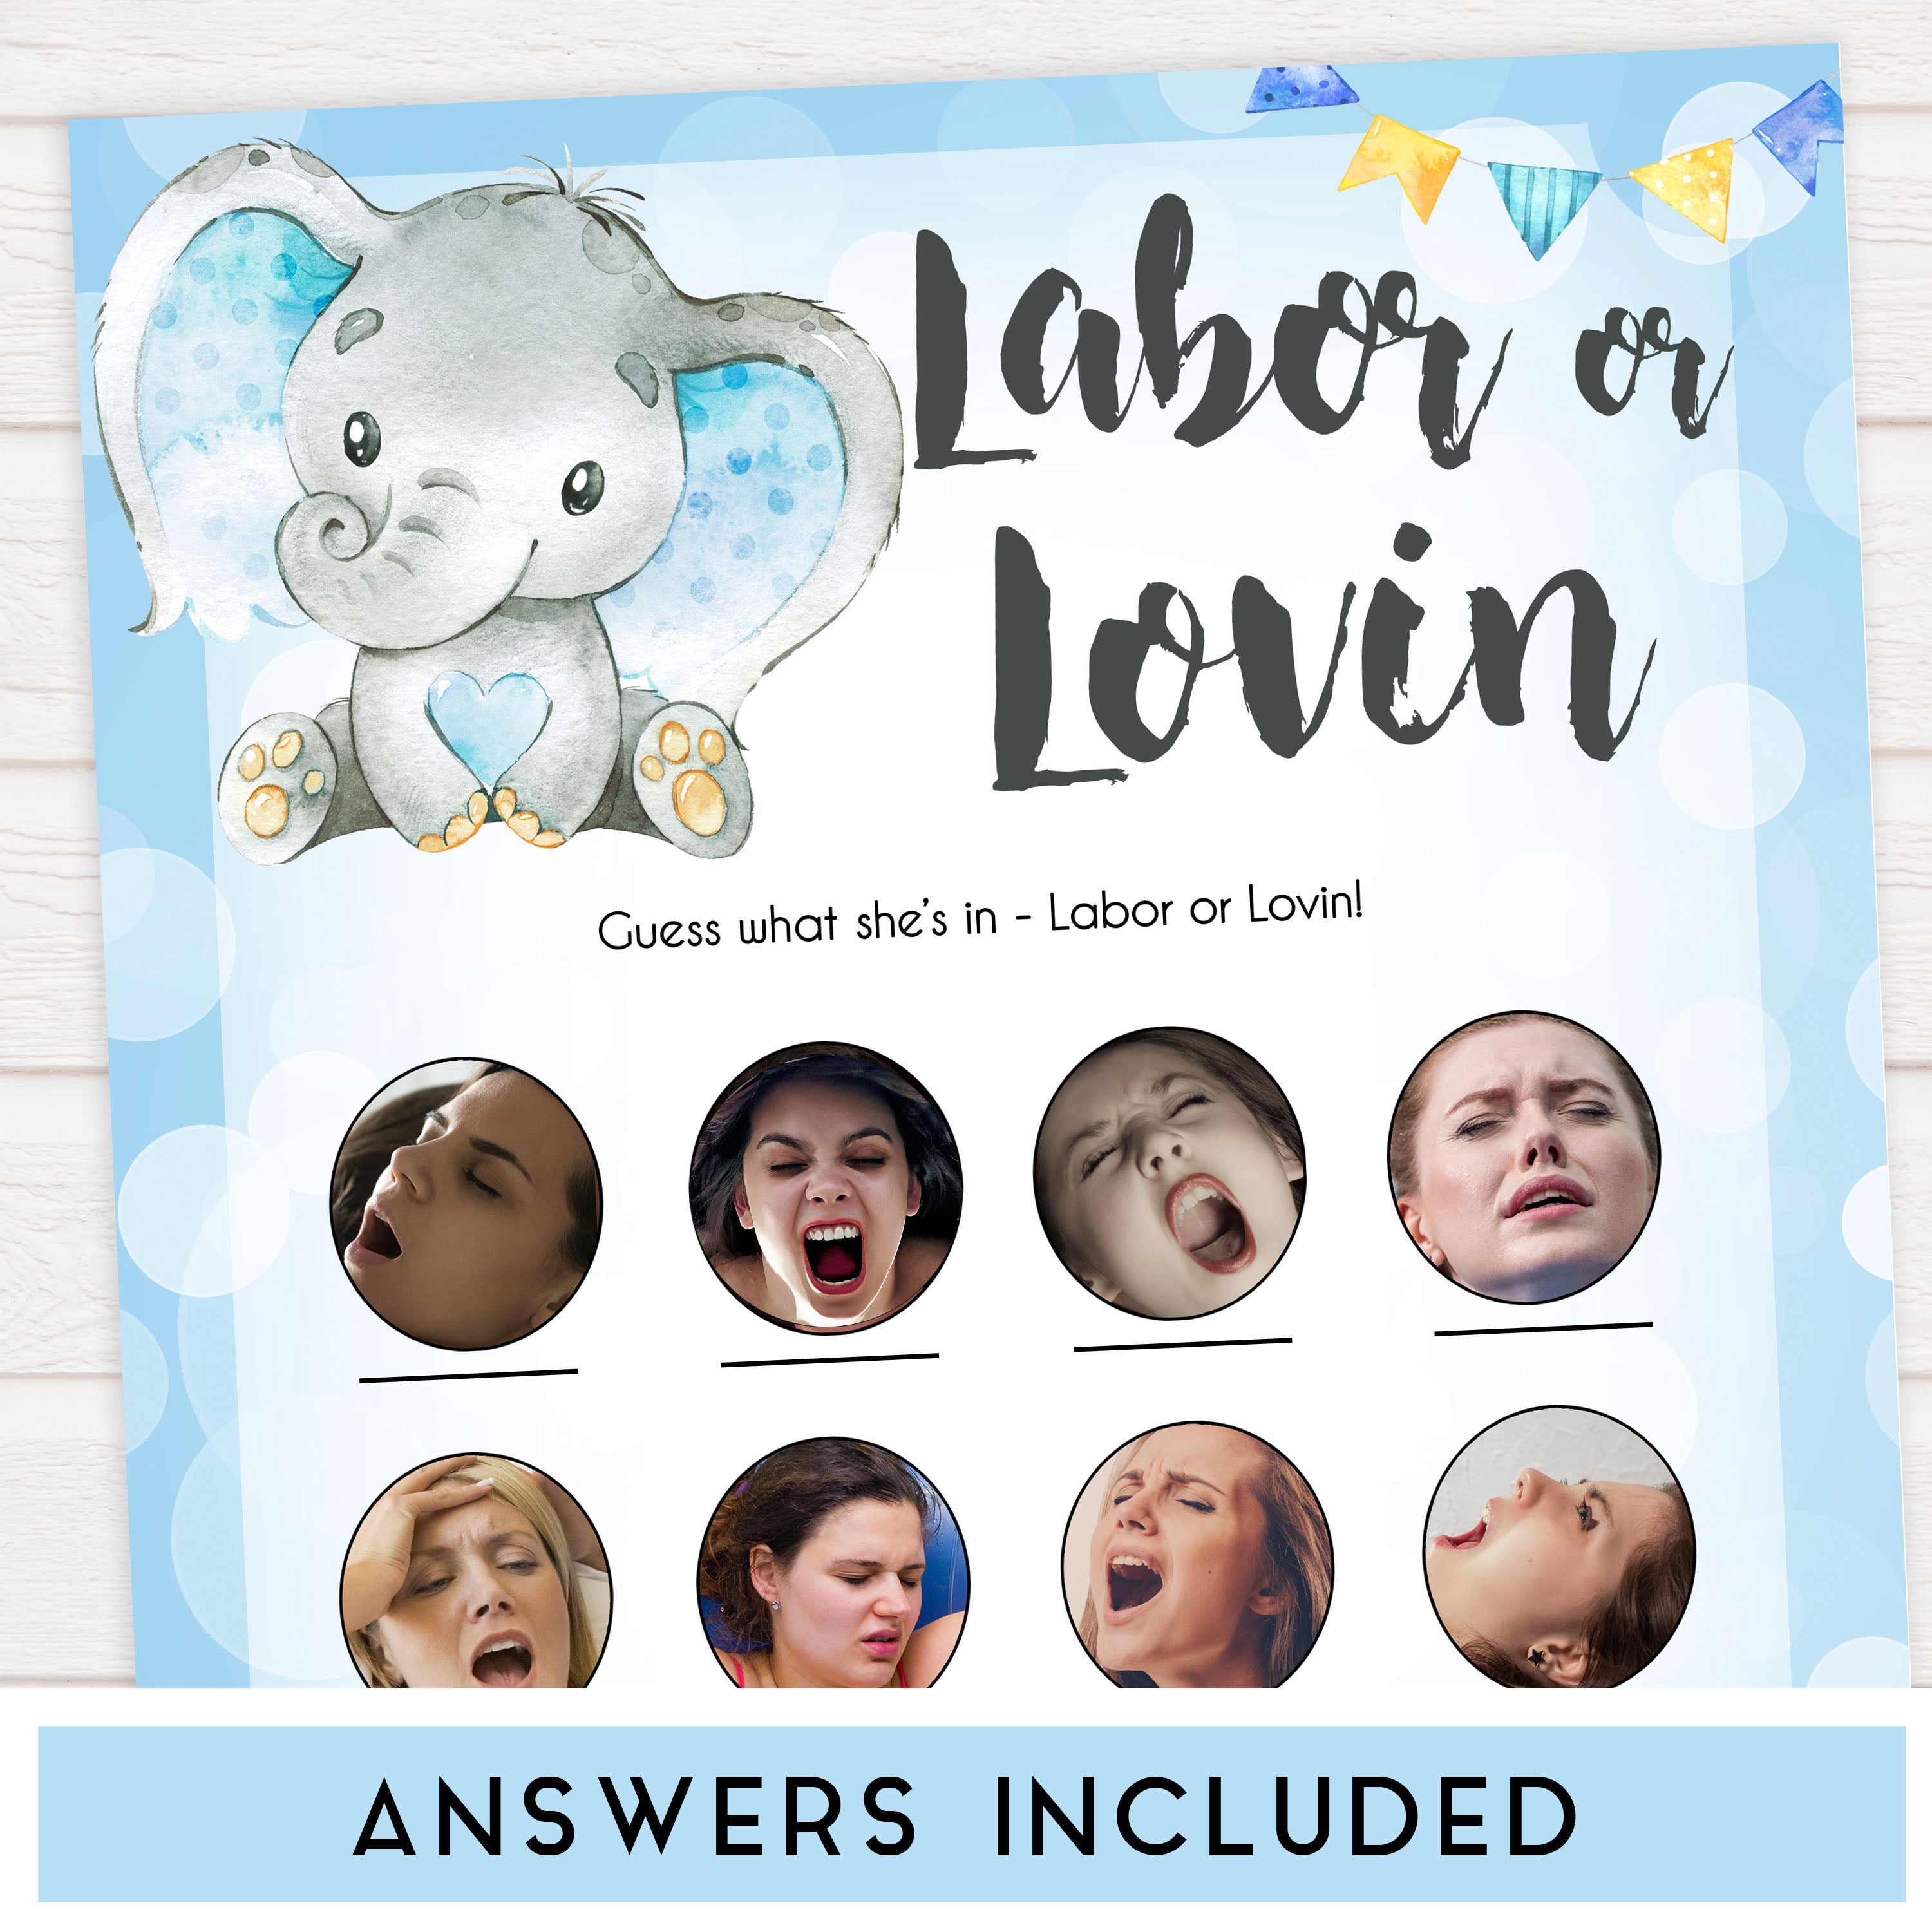 Blue elephant baby games, labour or lovin, labor or porn, elephant baby games, printable baby games, top baby games, best baby shower games, baby shower ideas, fun baby games, elephant baby shower